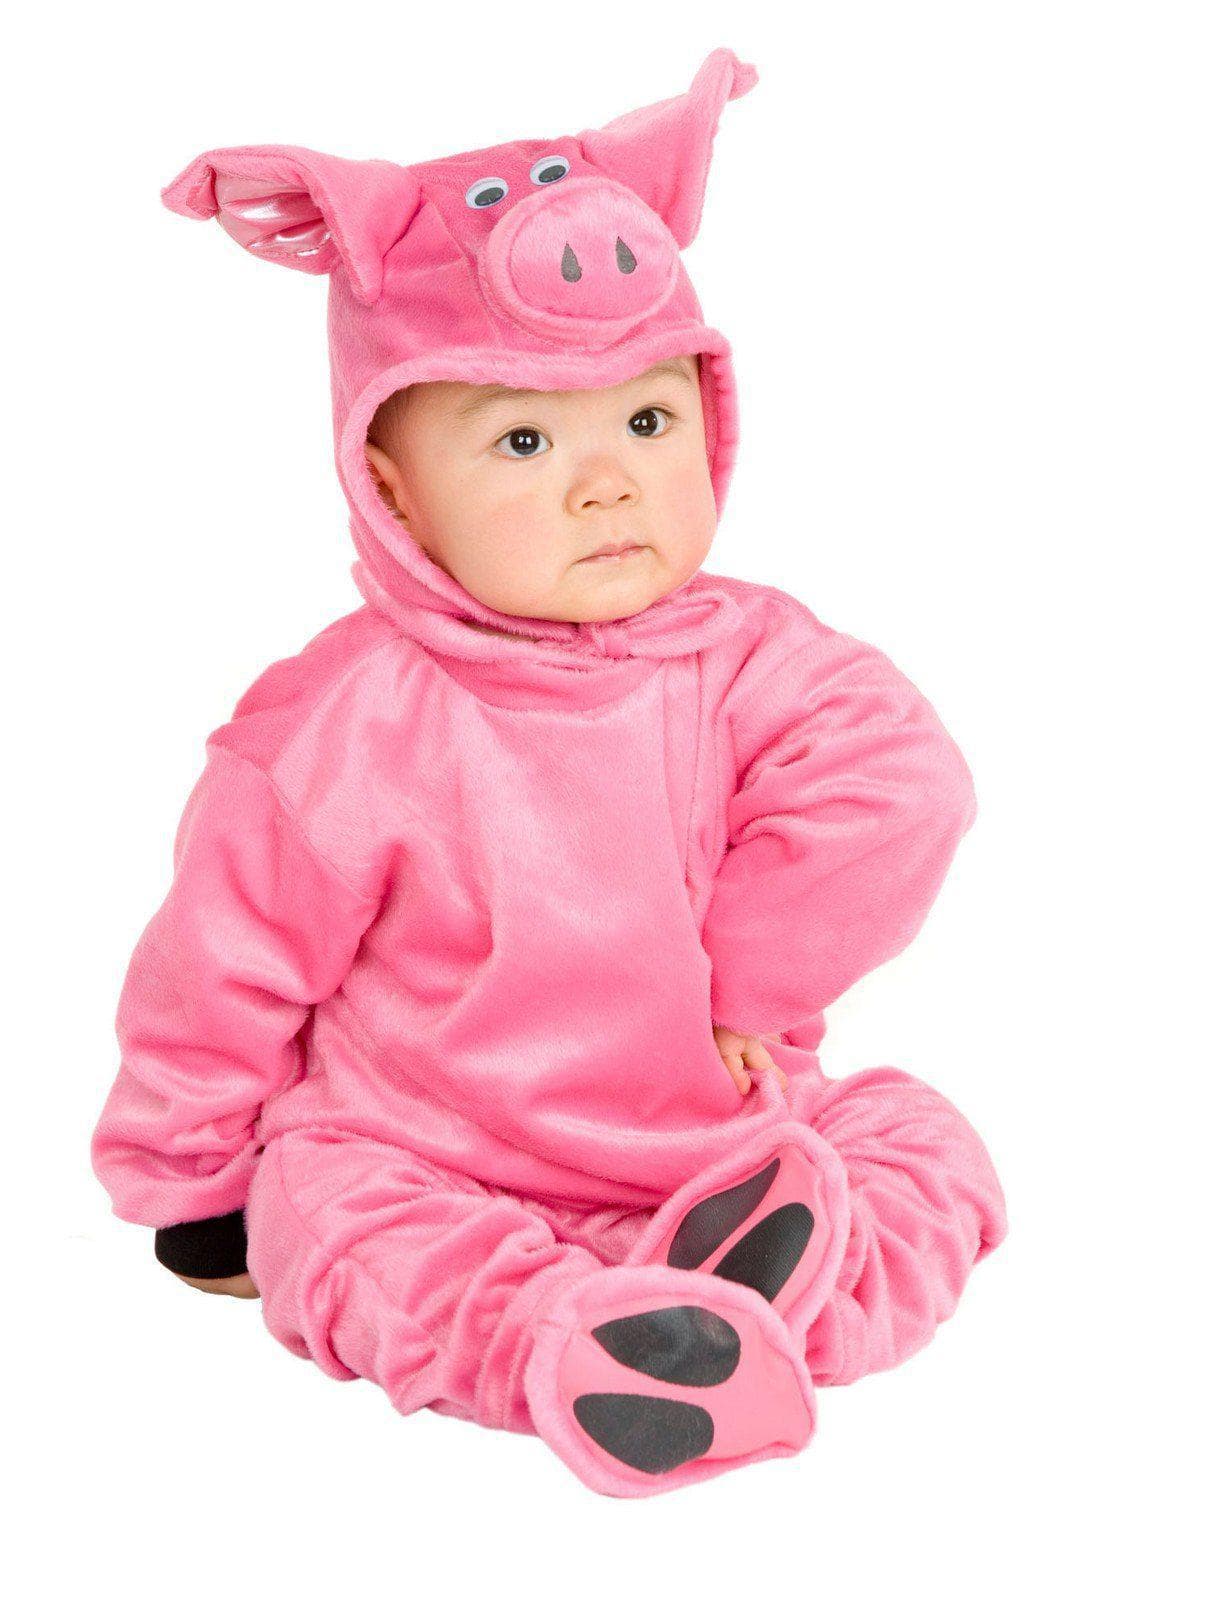 Baby/Toddler Little Pig Costume - costumes.com